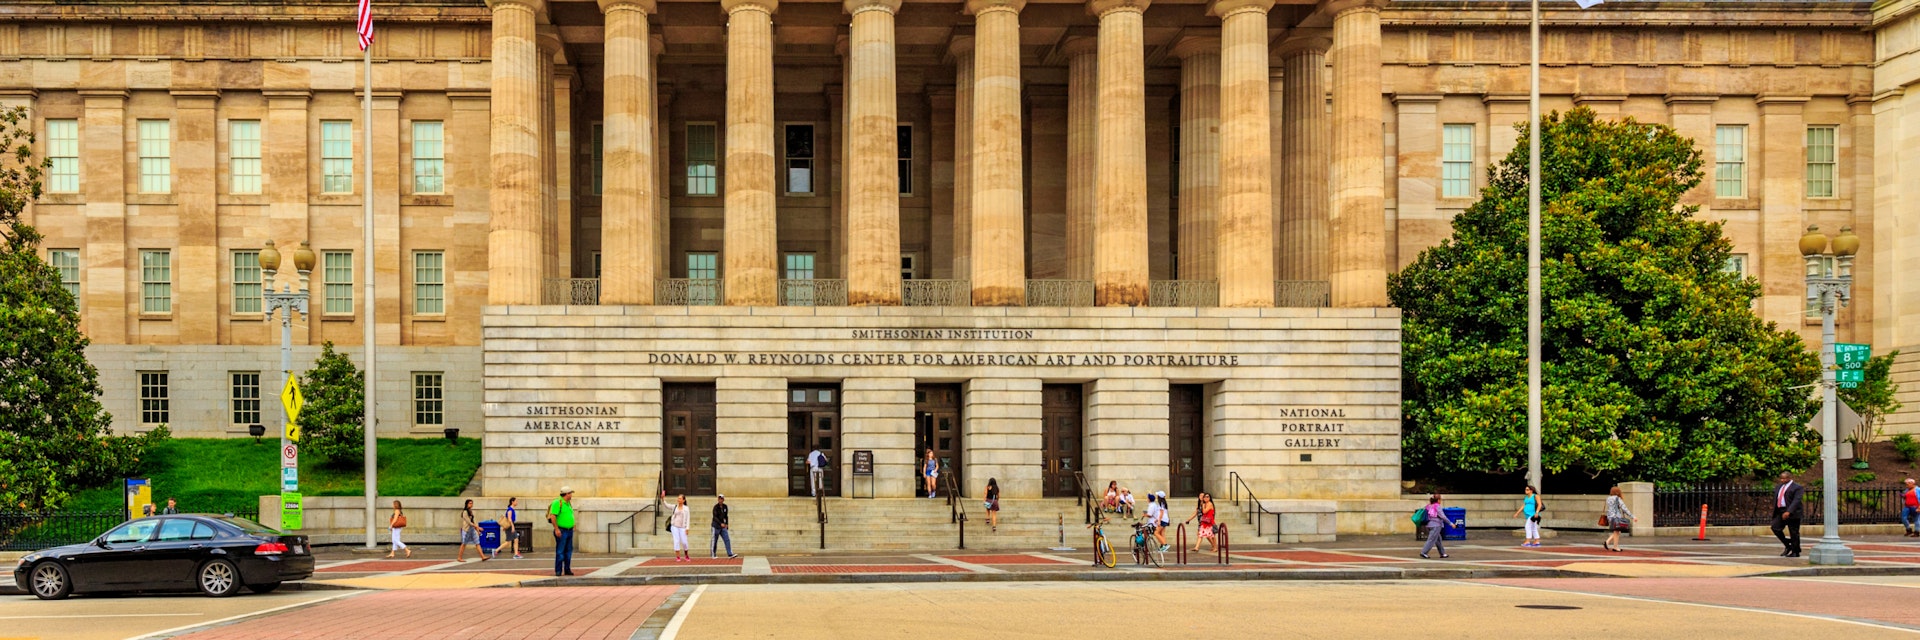 Washington DC, USA - July 1, 2015: The Smithsonian American Art Museum and National Portrait Gallery are both housed in the historic Old Patent Office Building.; Shutterstock ID 330696272; Your name (First / Last): Josh Vogel; GL account no.: 56530; Netsuite department name: Online Design; Full Product or Project name including edition: Digital Content/Sights